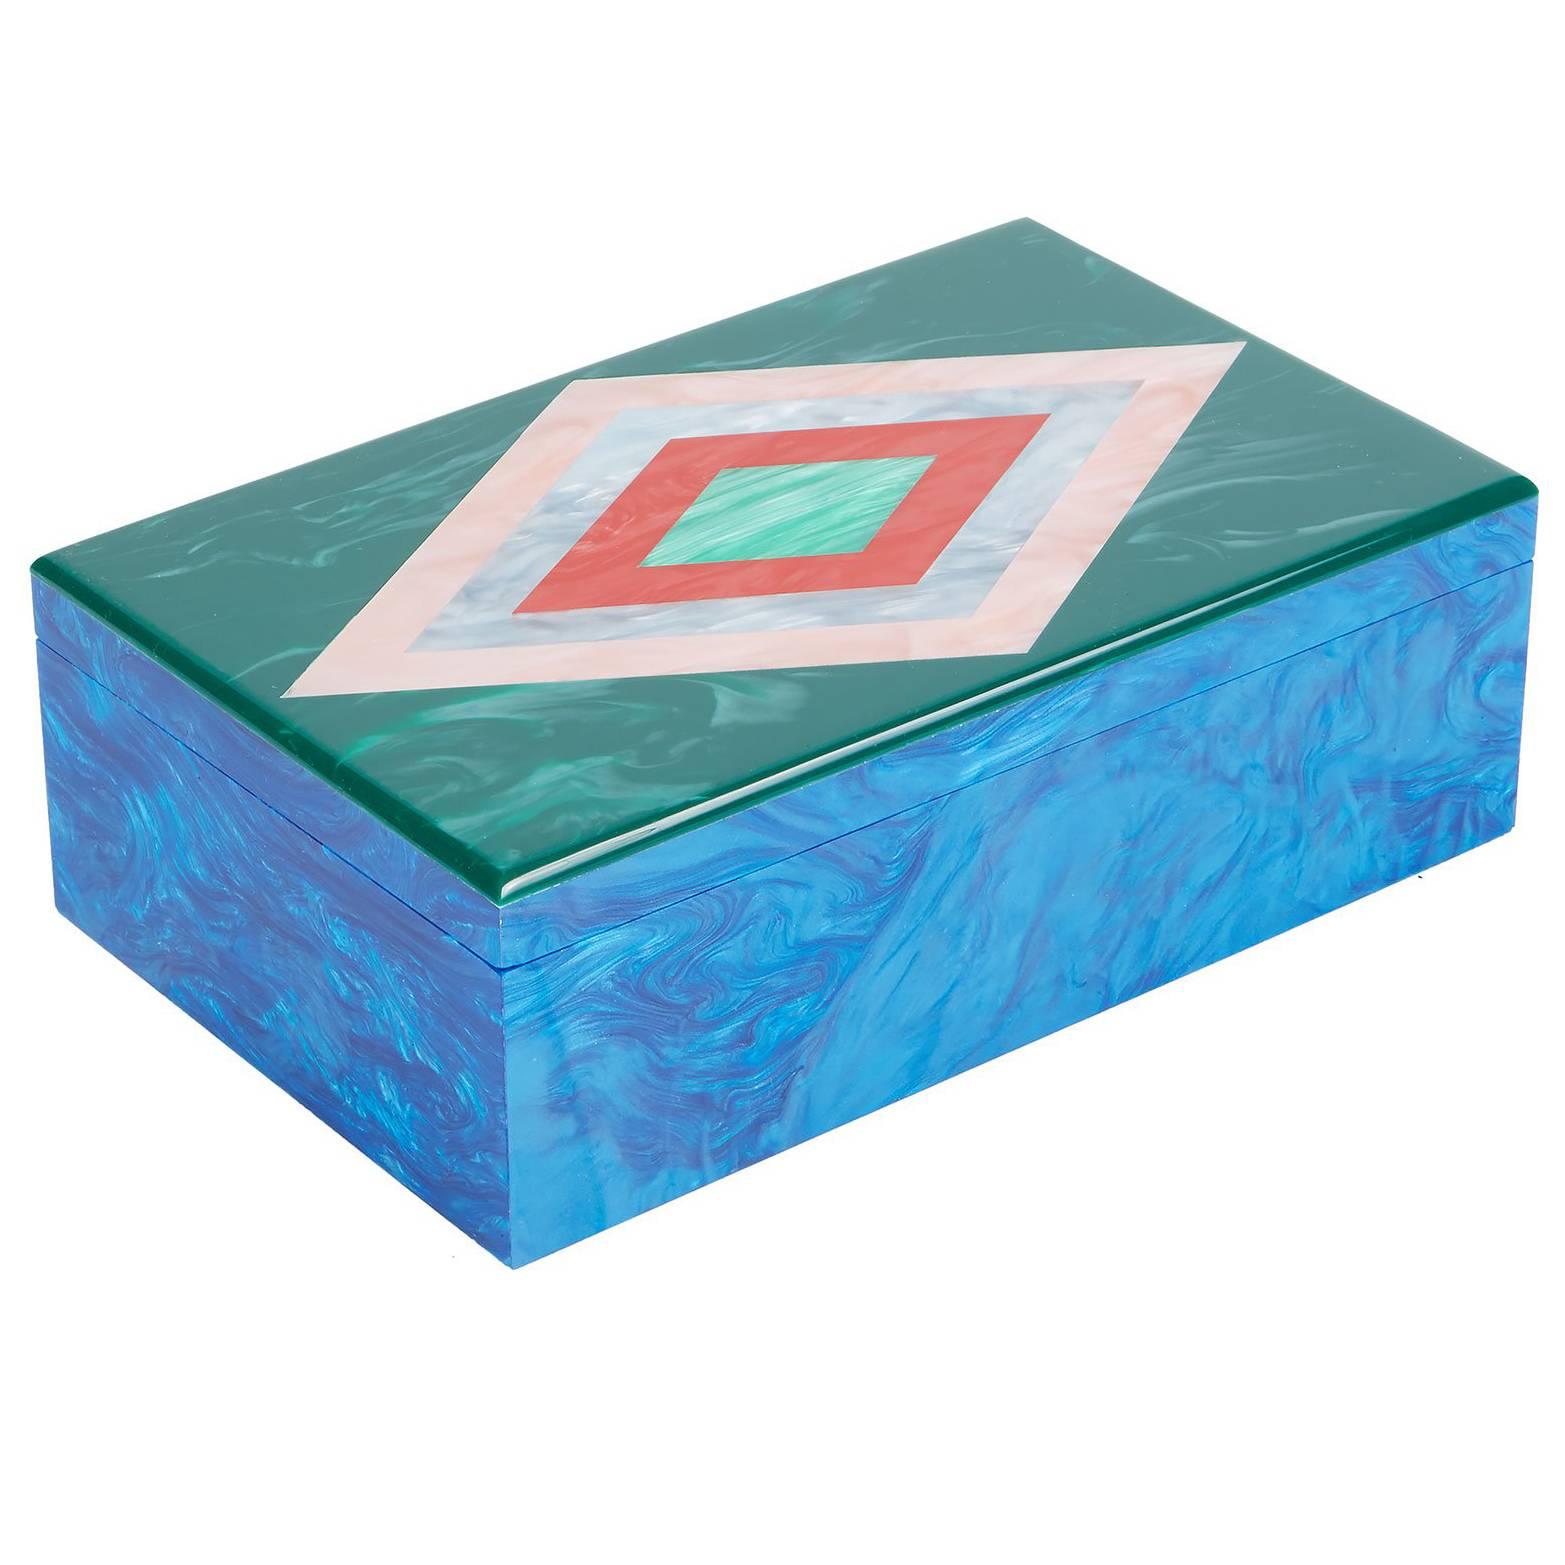 Edie Parker Home Diamond Box in Ocean Blue Pearlescent and Malachite Acrylic For Sale